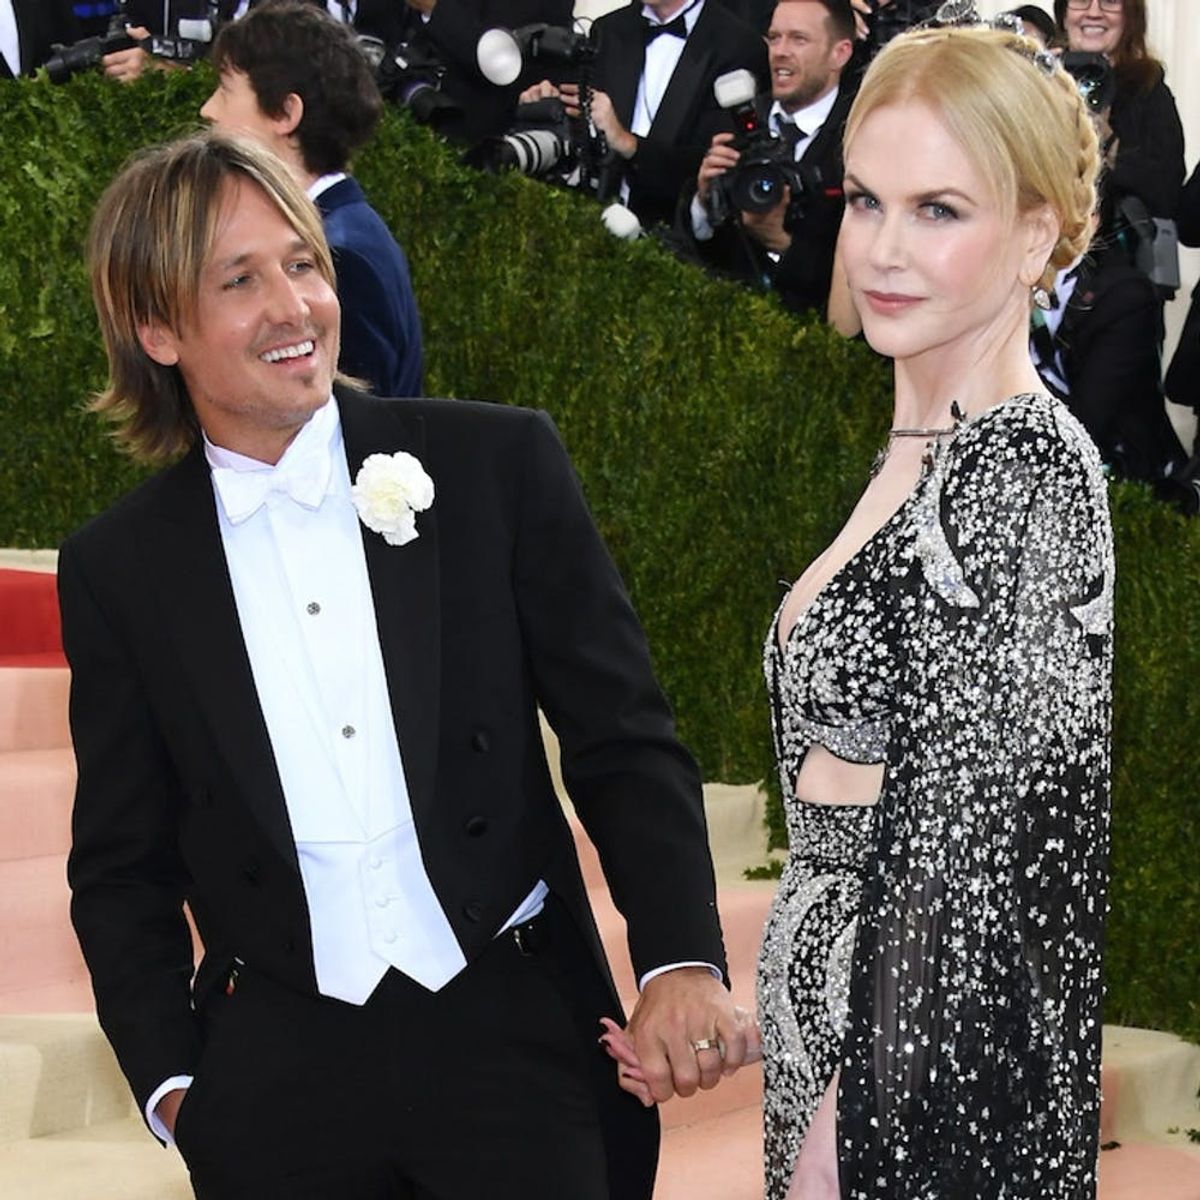 7 of THE Sweetest Celeb Couples at This Year’s Met Gala